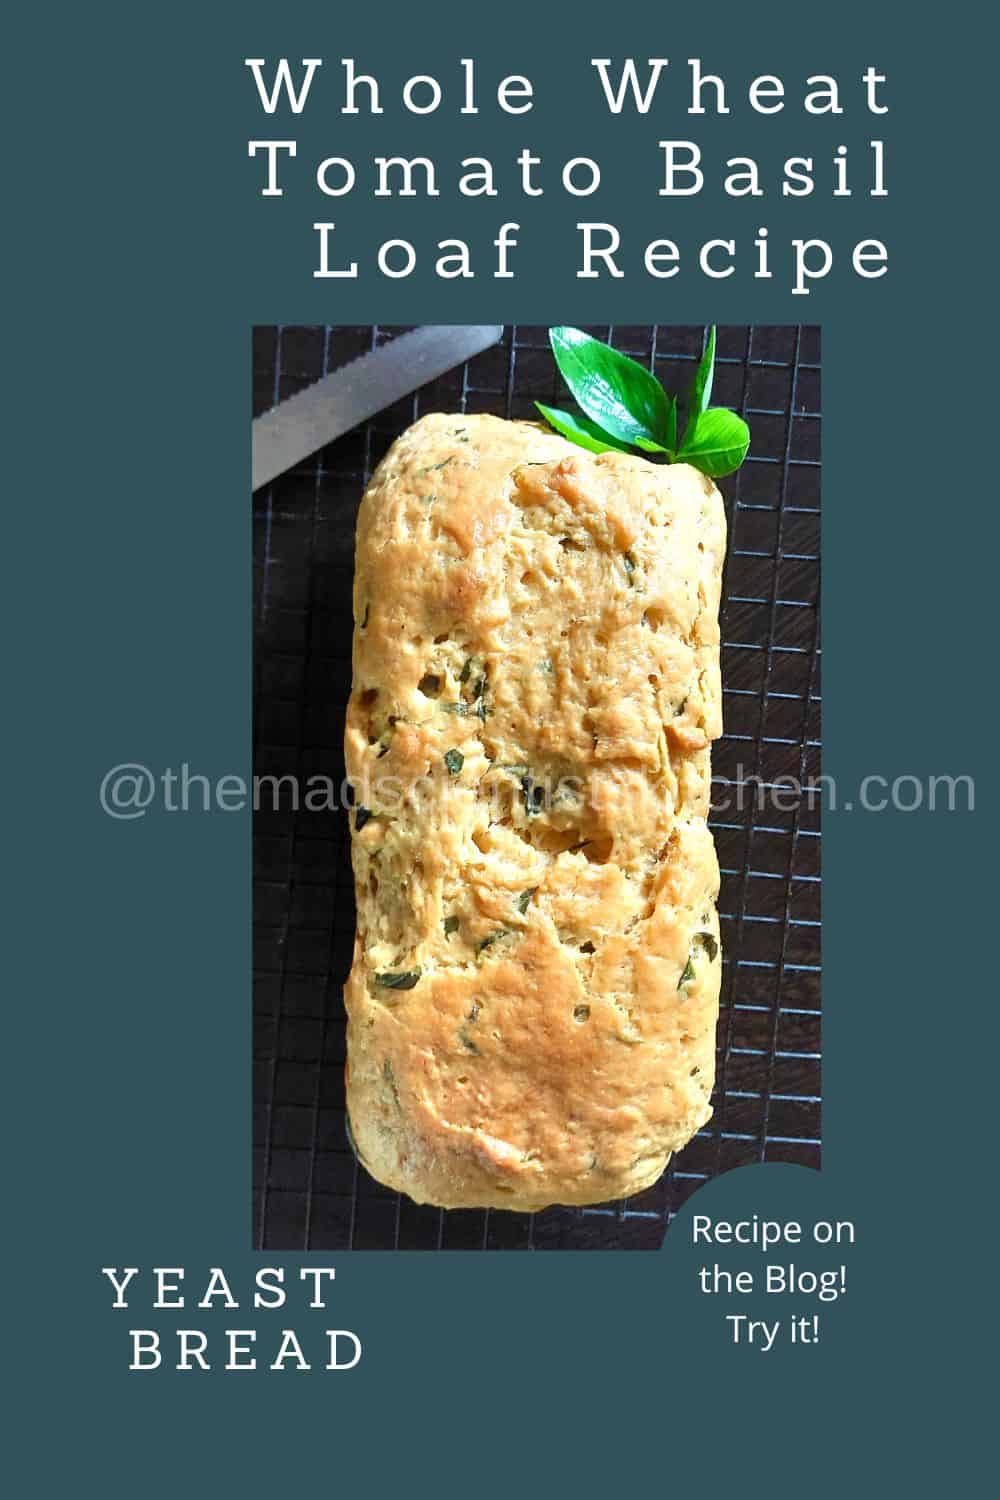 A bread that tastes wonderfully delicious. Uses fresh basil and sun-dried tomatoes for flavouring.